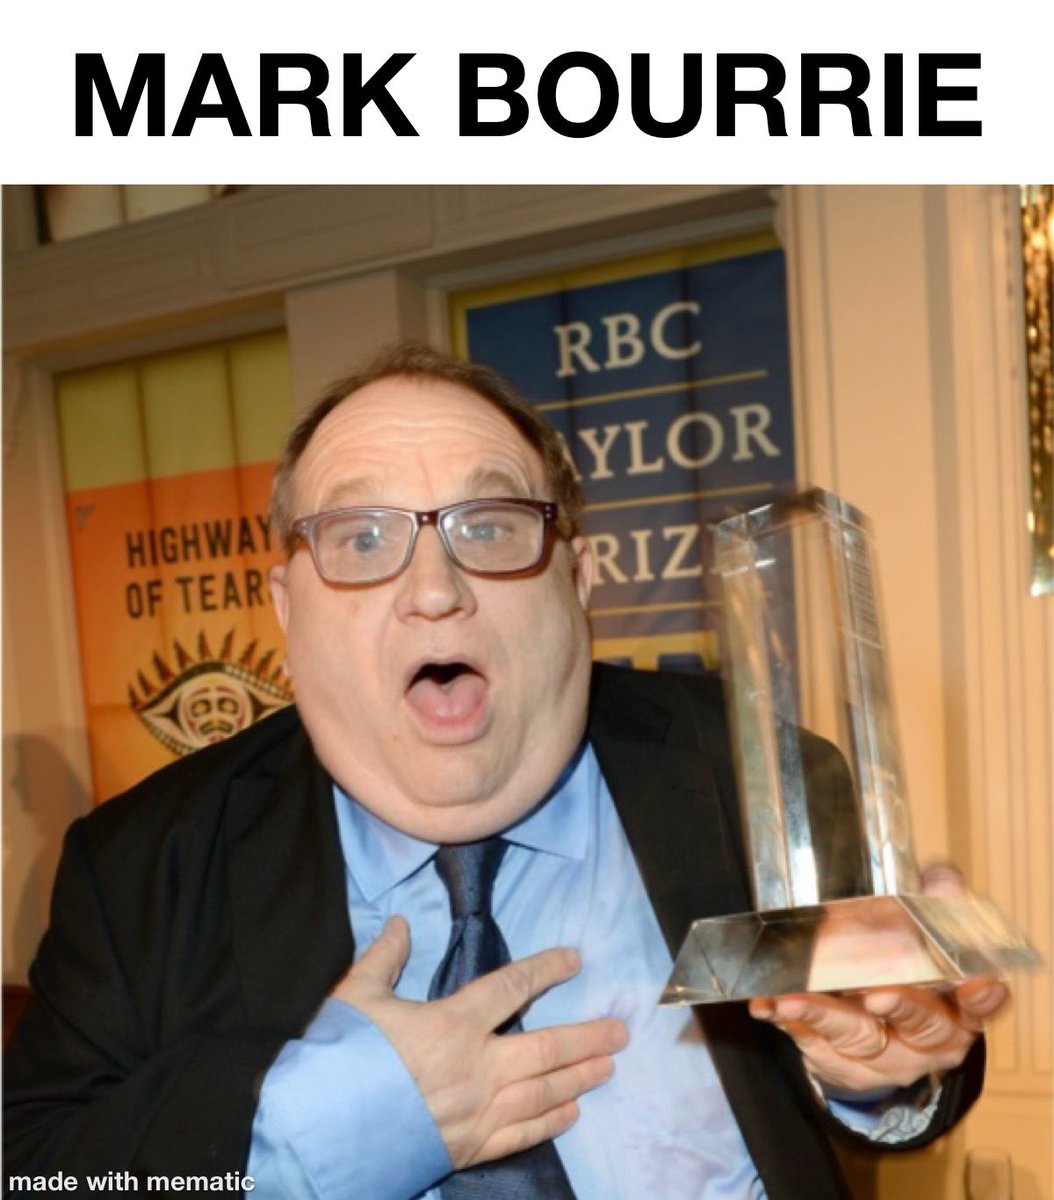 Pro tip for Mark Bourrie, Liberal lawyer from Ottawa: People who live in glass houses shouldn’t throw stones. Leftists ALWAYS expose themselves as the hateful, toxic people they really are.